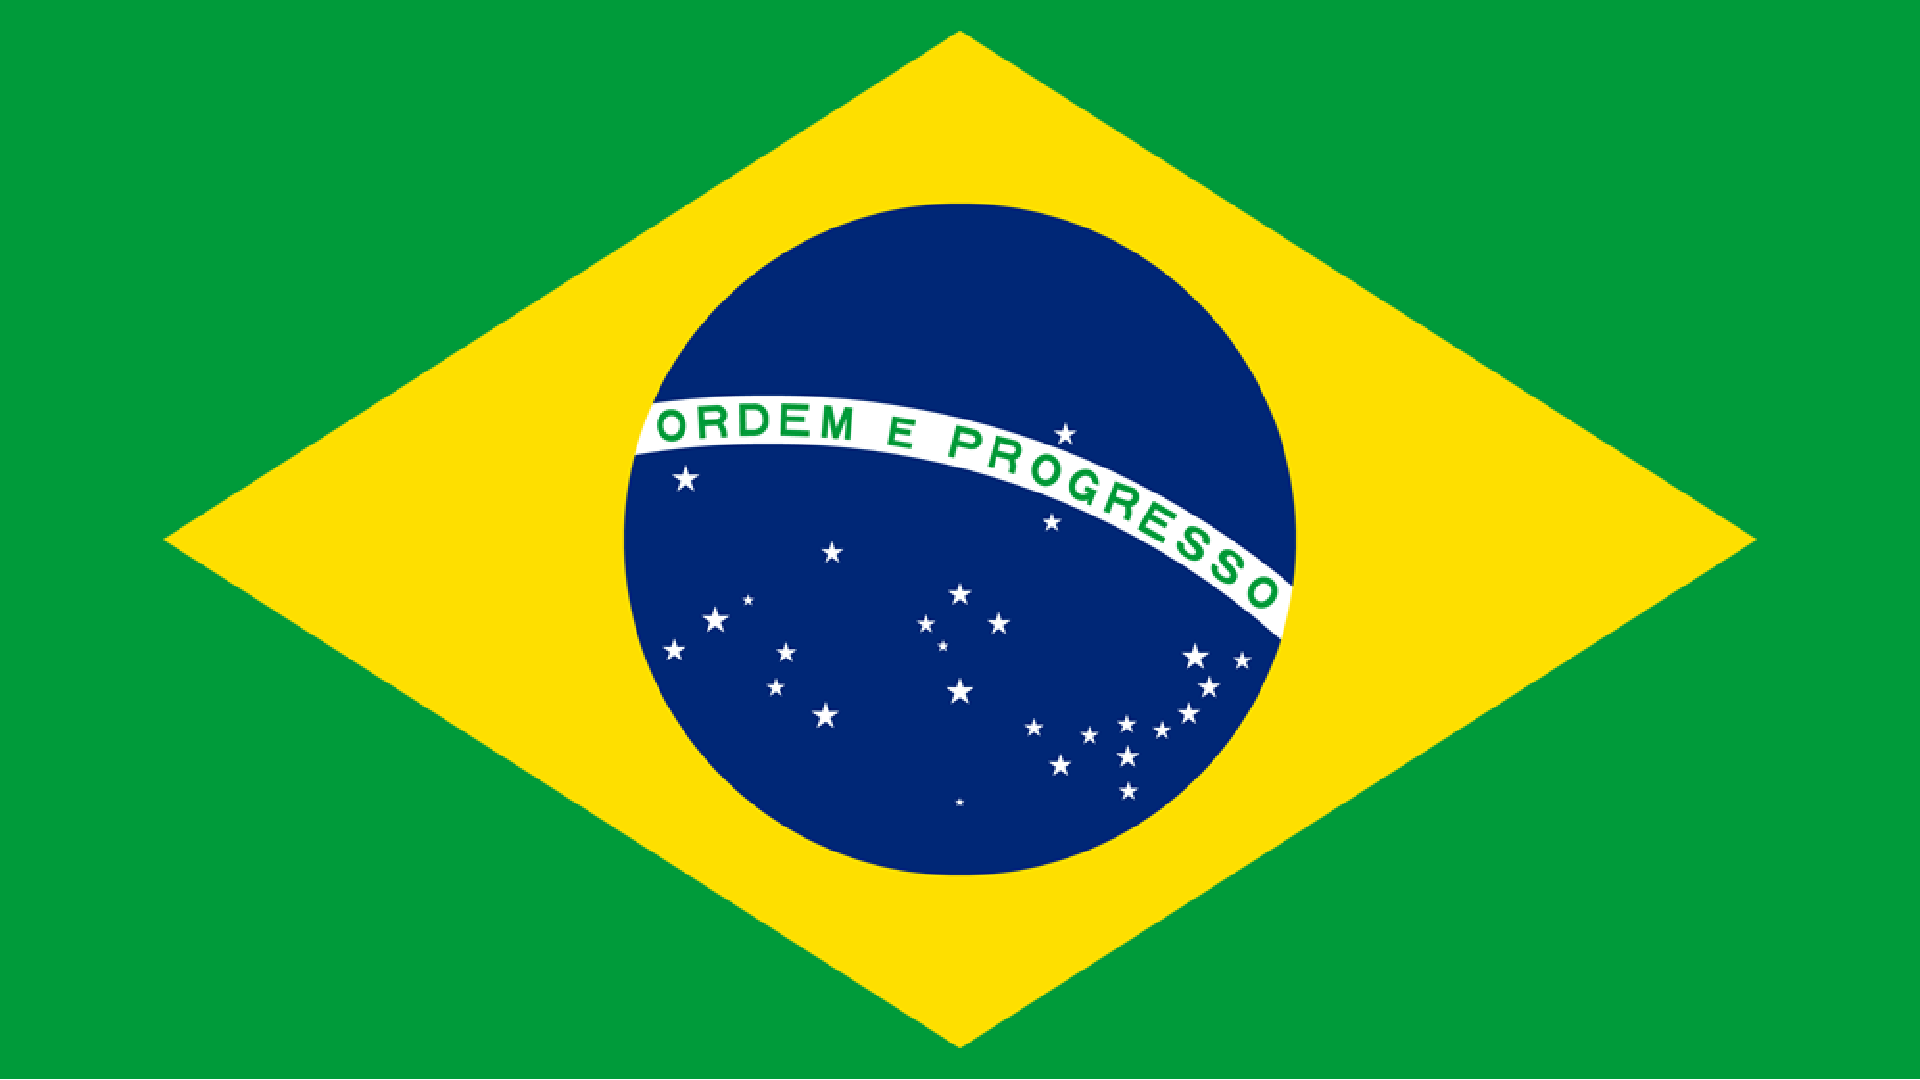 An image of the flag of Brazil